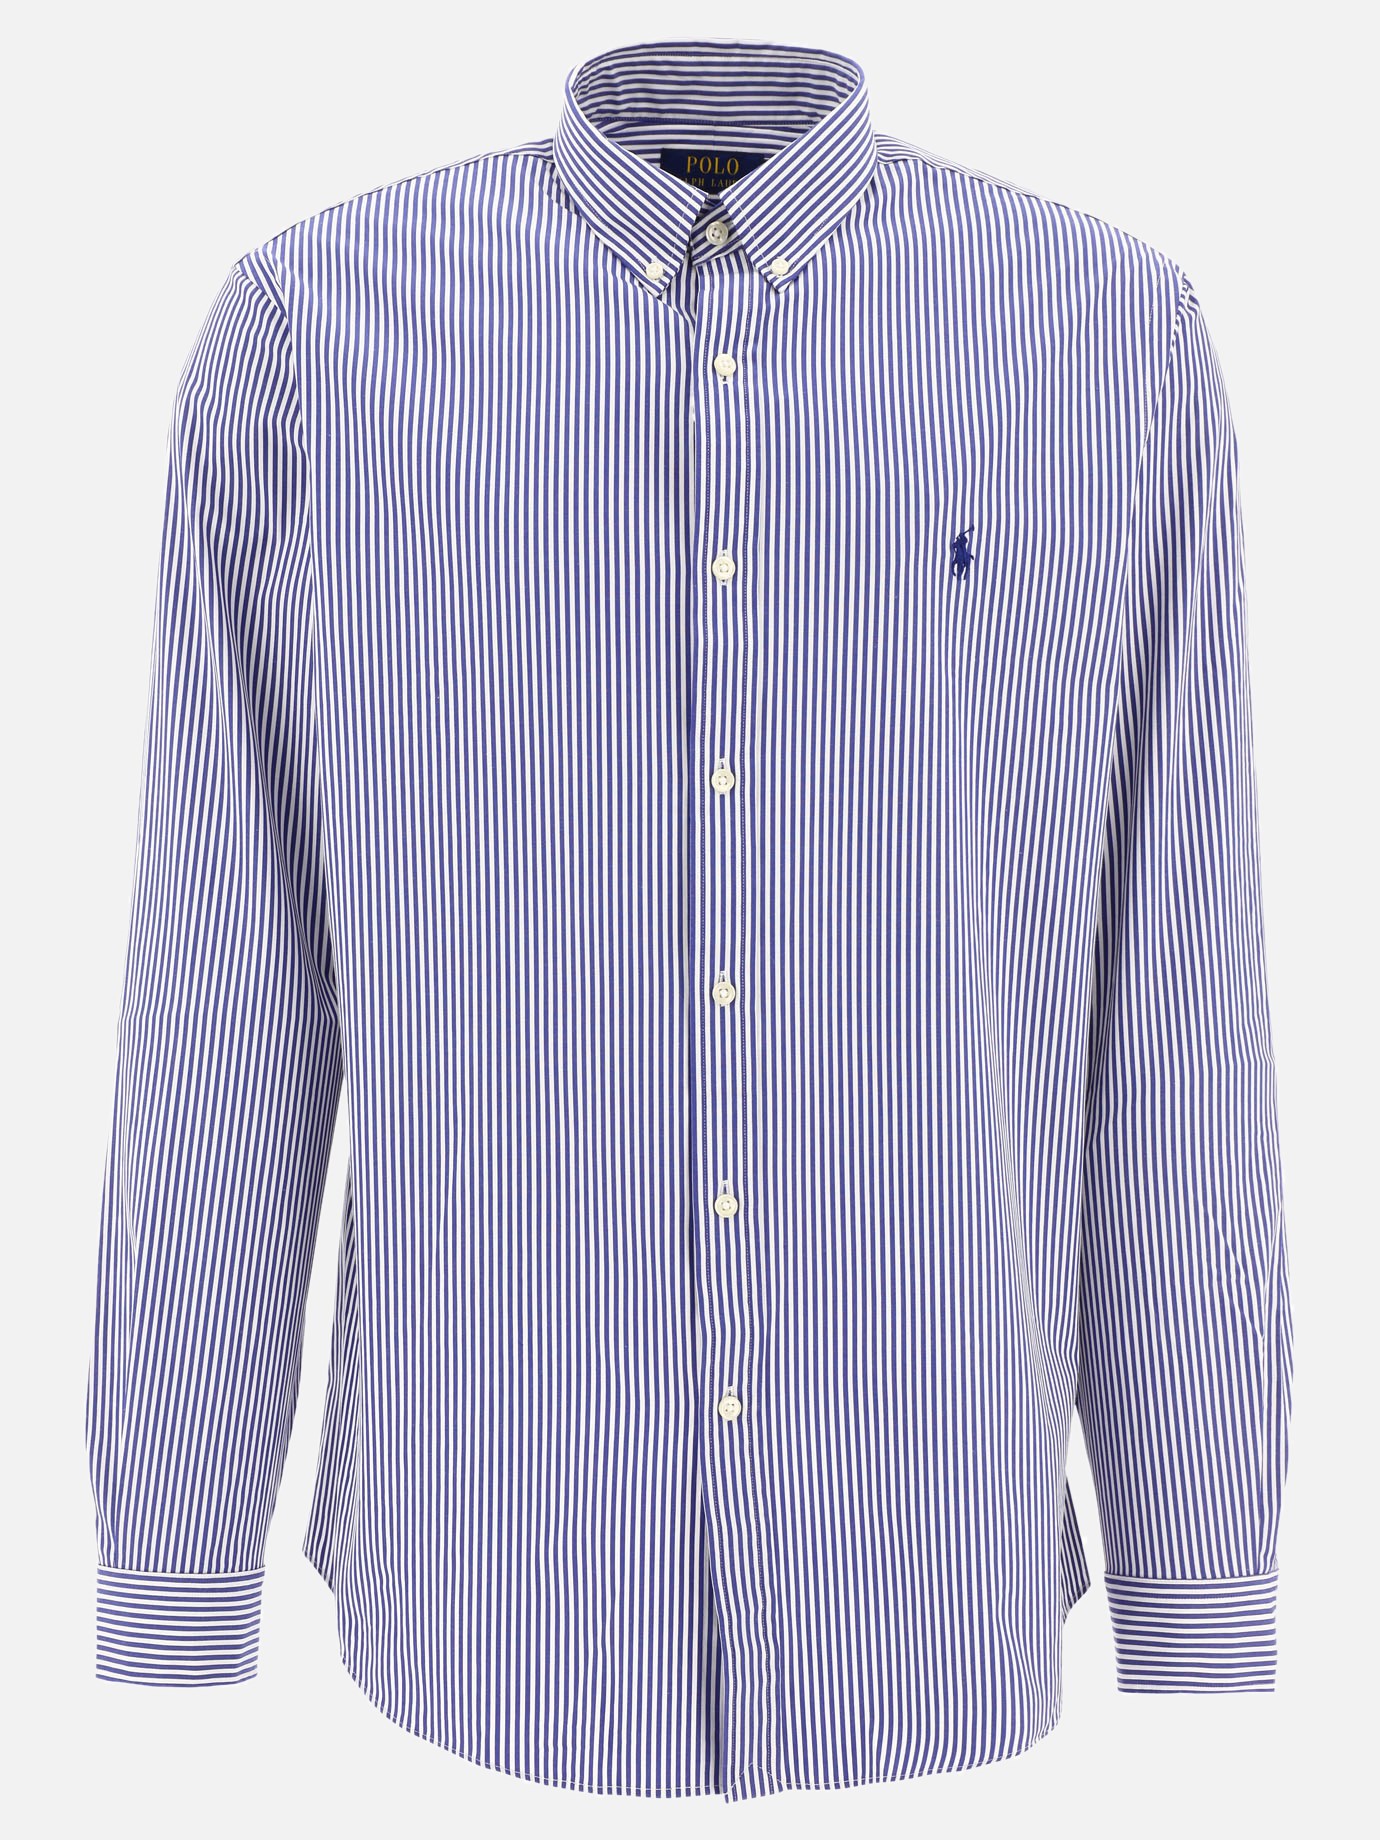 Camicia a righe  Pony by Polo Ralph Lauren - 5